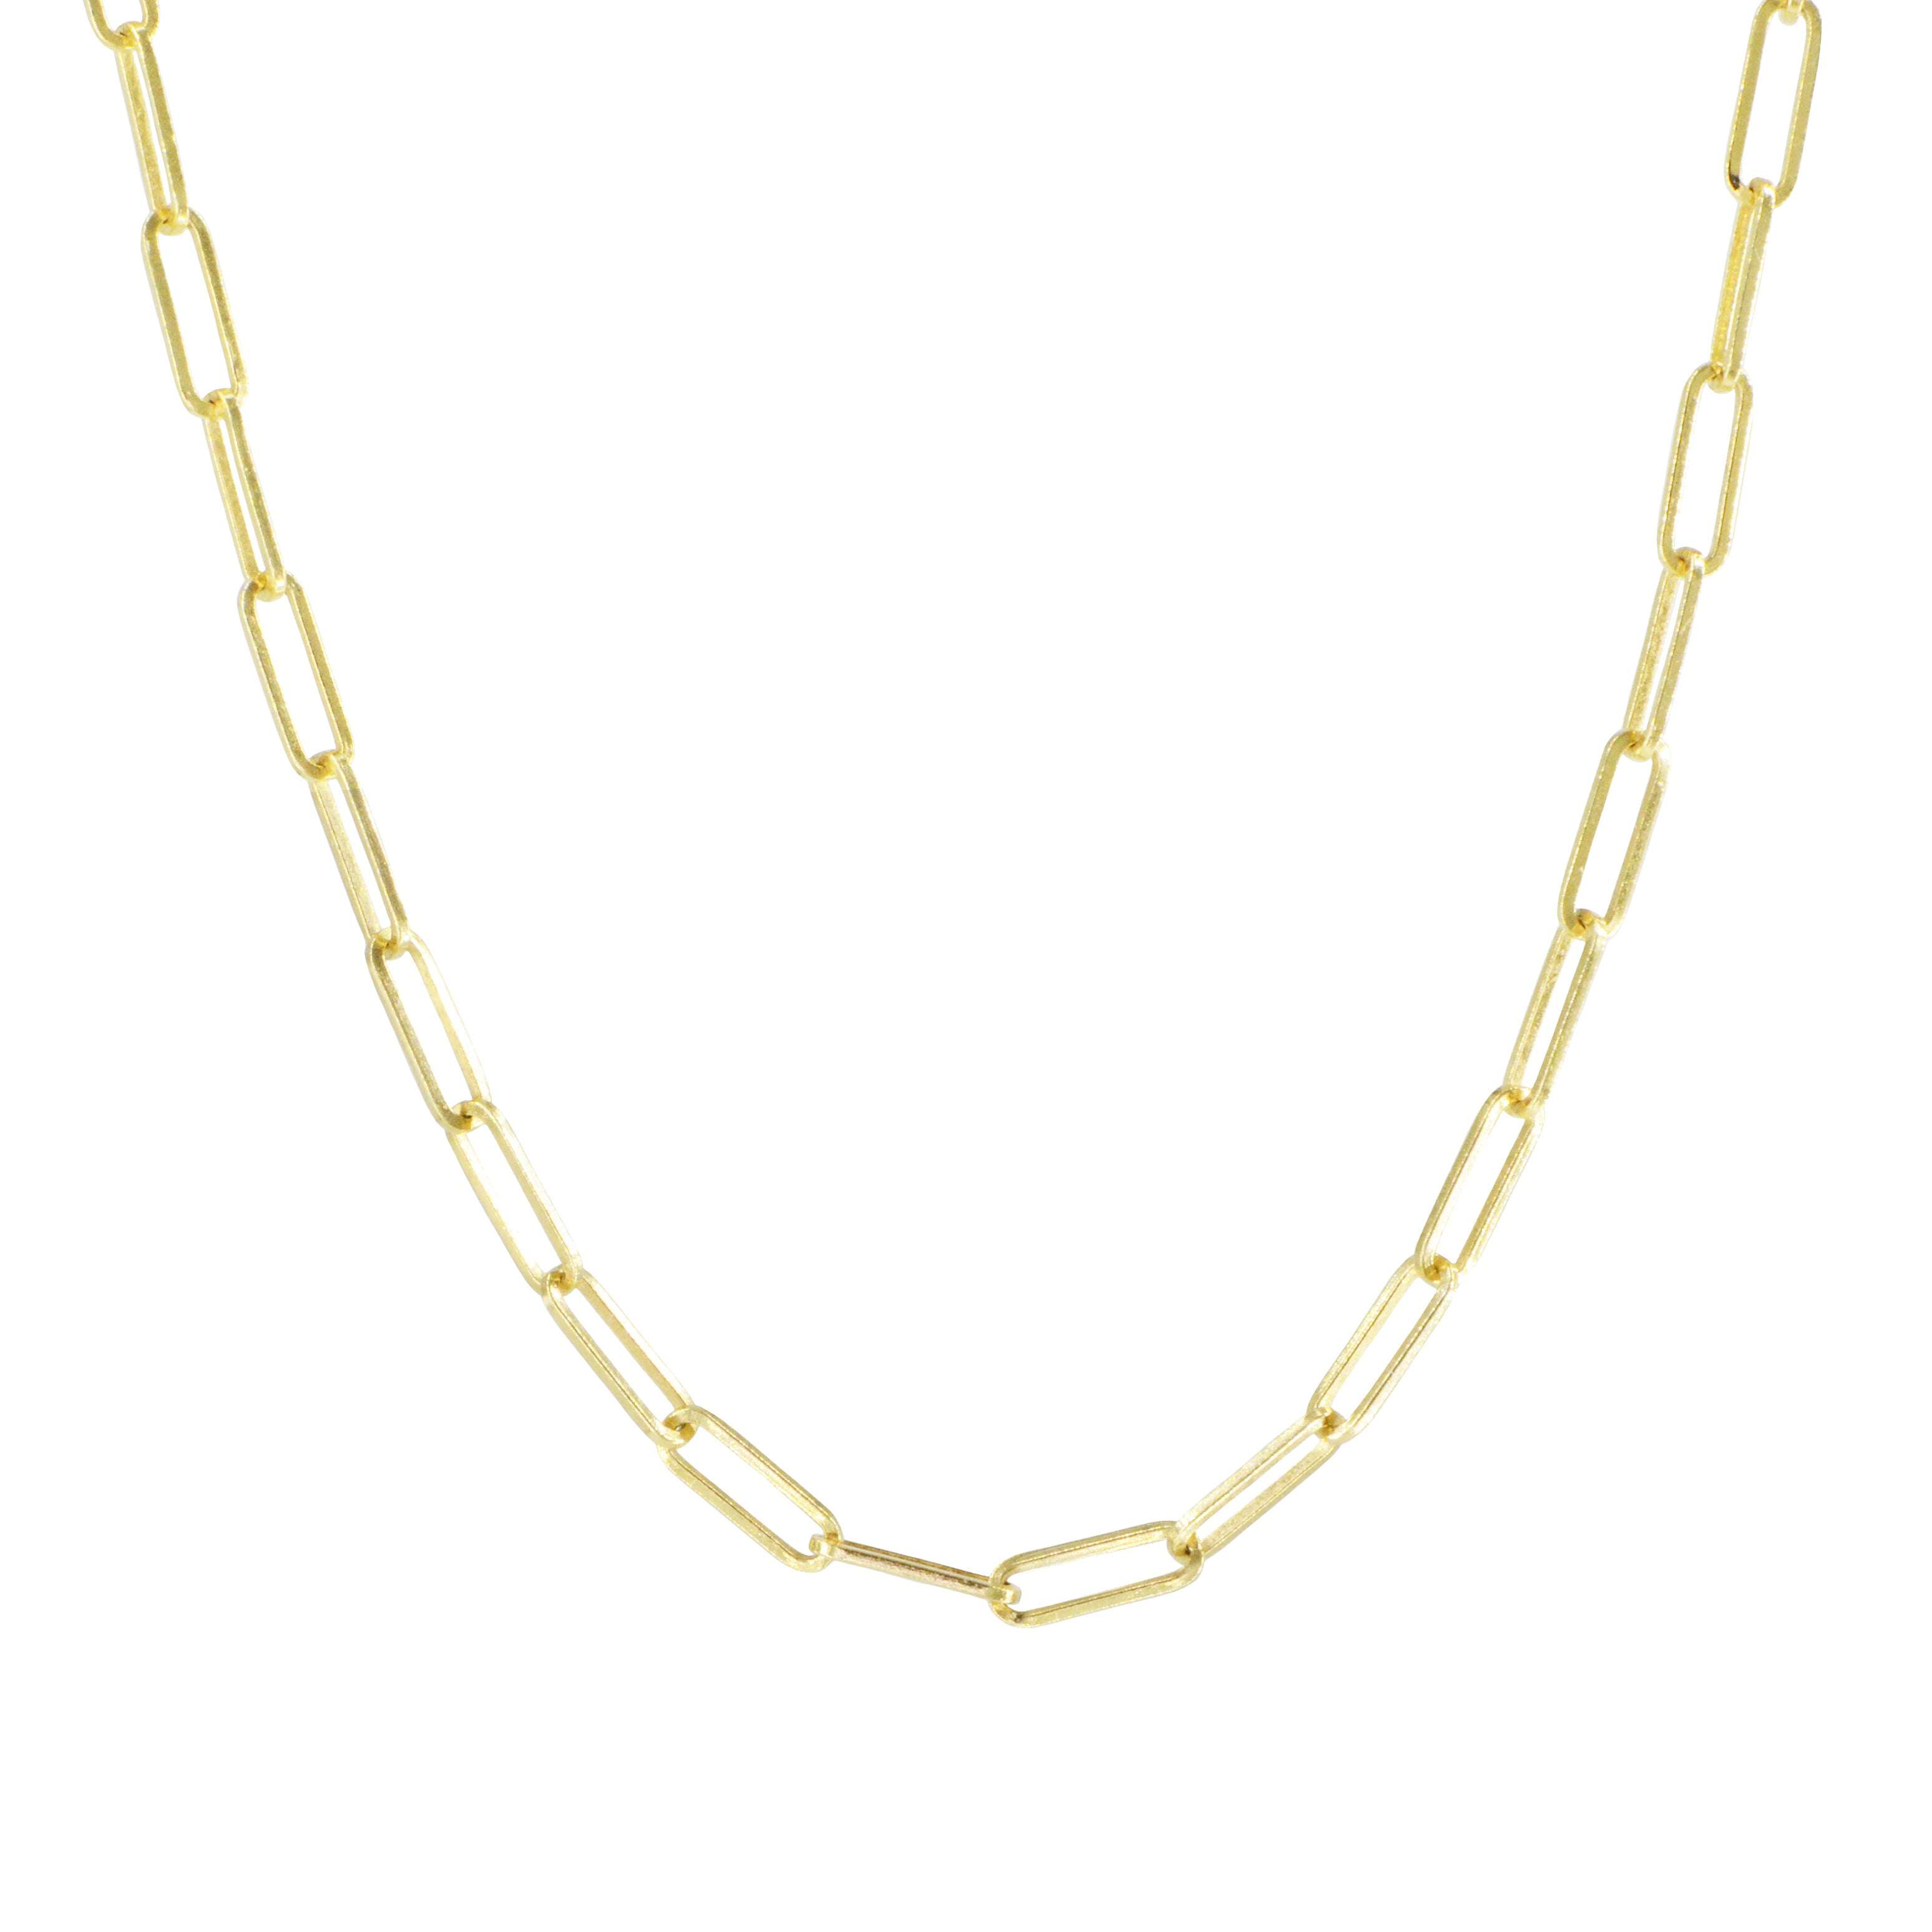 Best paperclip necklaces: Gold and silver chains to suit your style |  Evening Standard